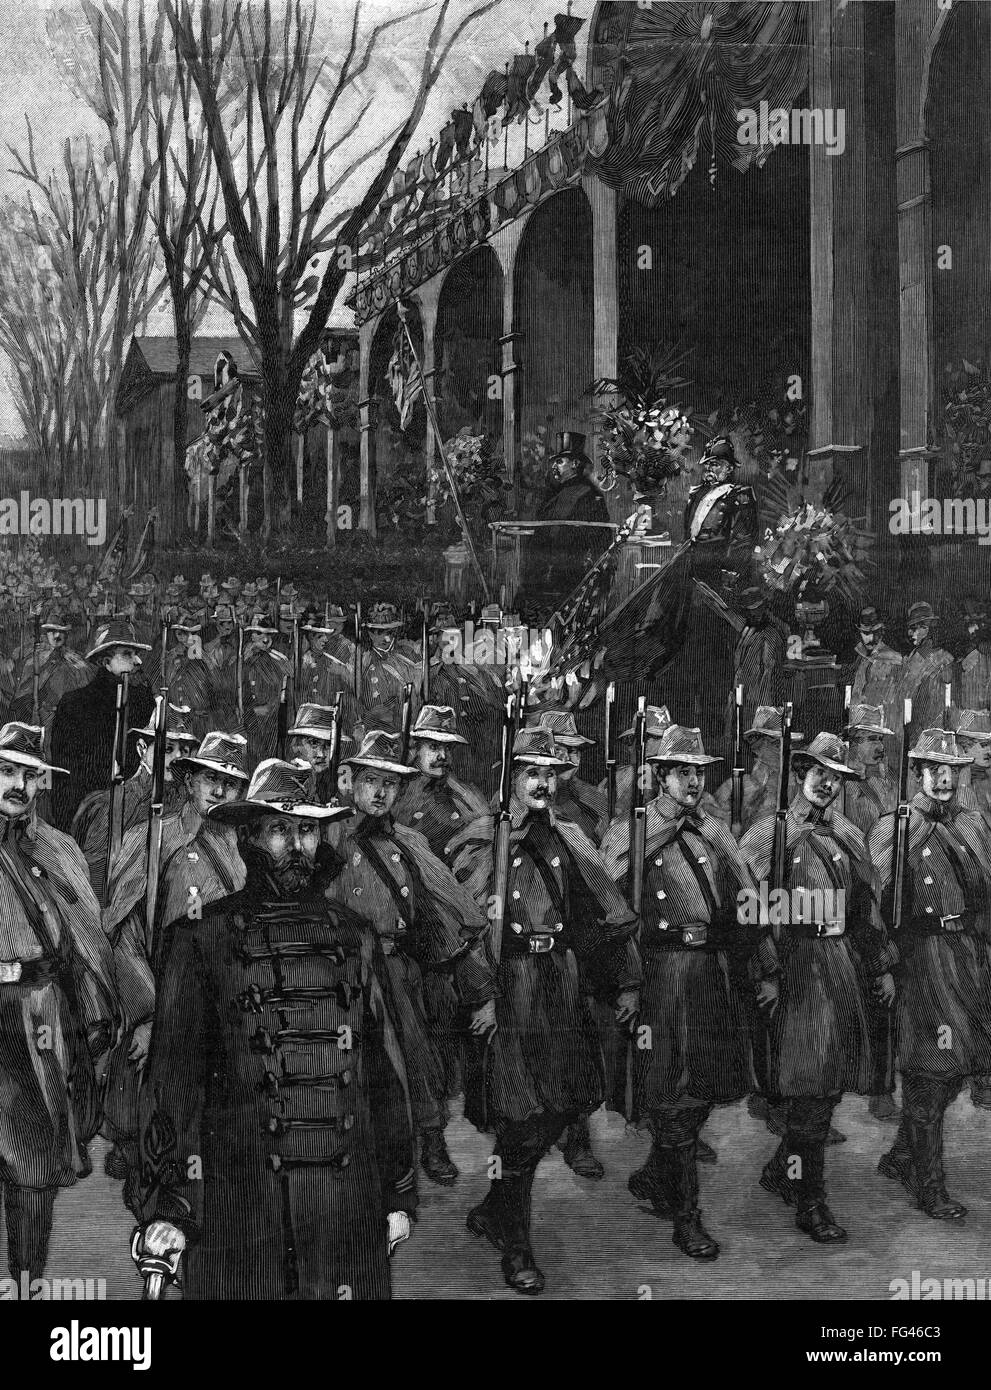 CLEVELAND INAUGURATION. /nPennsylvania troops marching past the review stand during the inaugural parade for President Grover Cleveland in Washington, D.C., 4 March 1893. Contemporary American wood engraving after a drawing by W.P. Snyder. Stock Photo